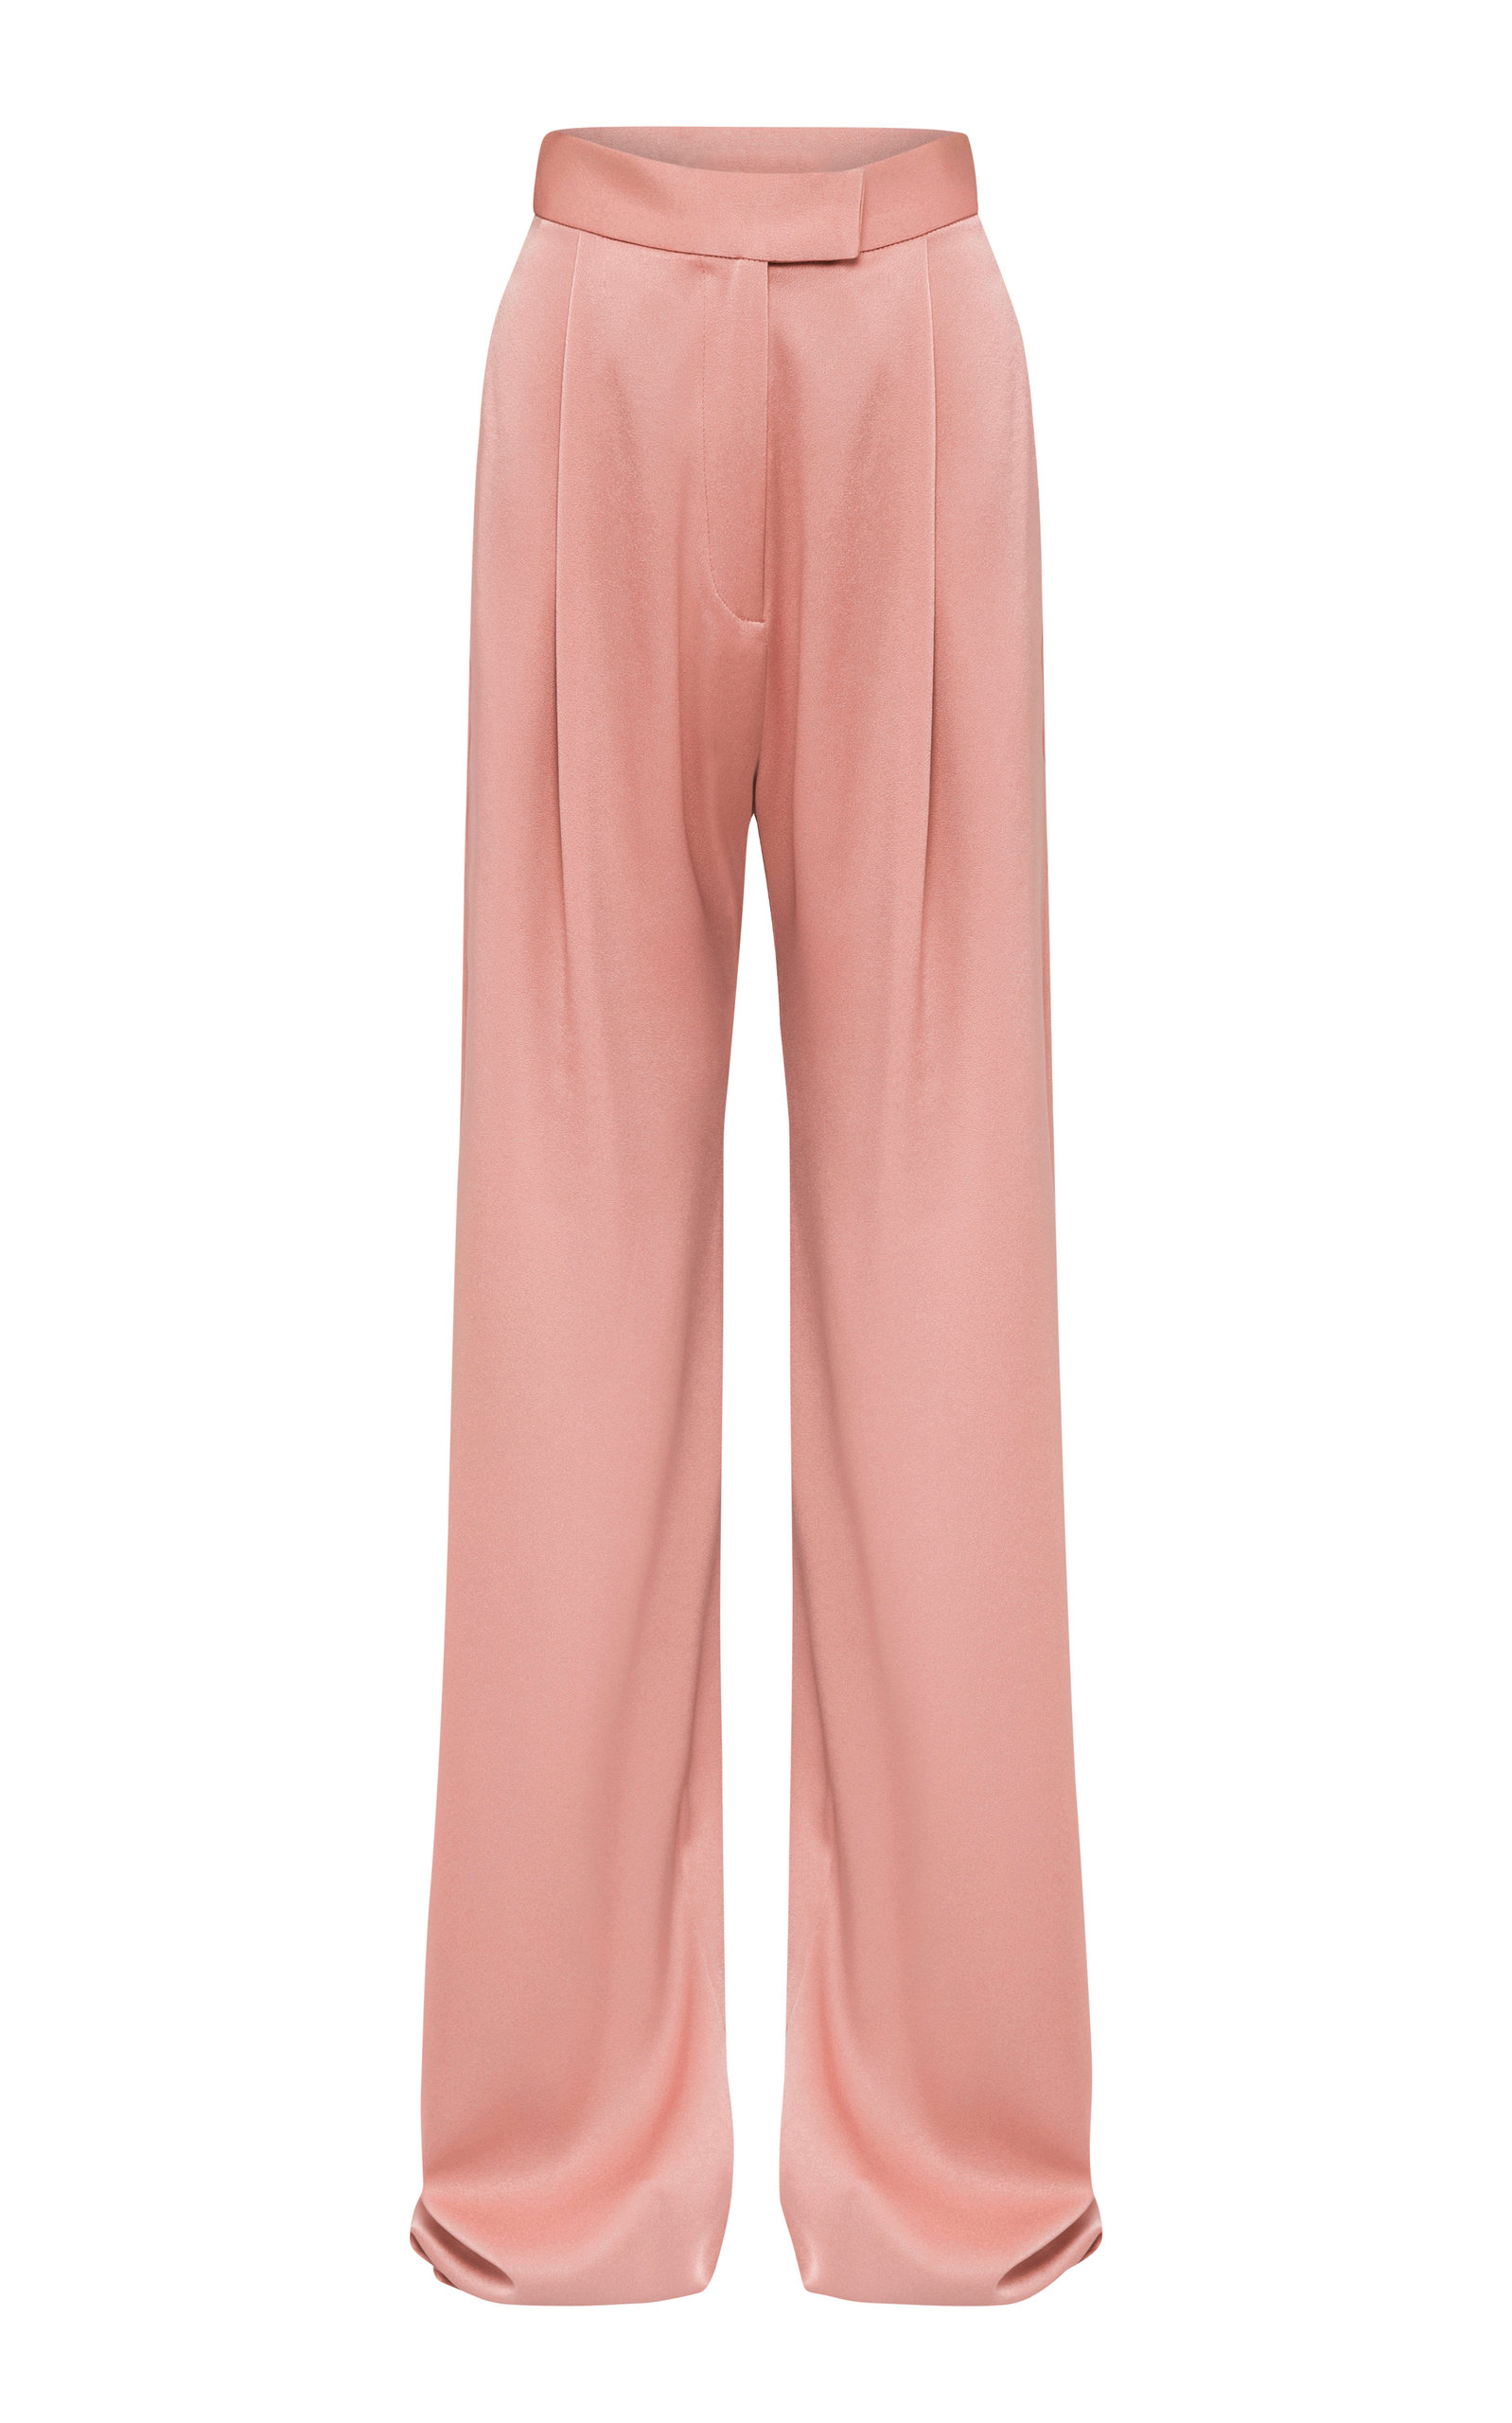 ALEX PERRY WOMEN'S HARTLEY SATIN CREPE PLEATED WIDE-LEG TROUSERS